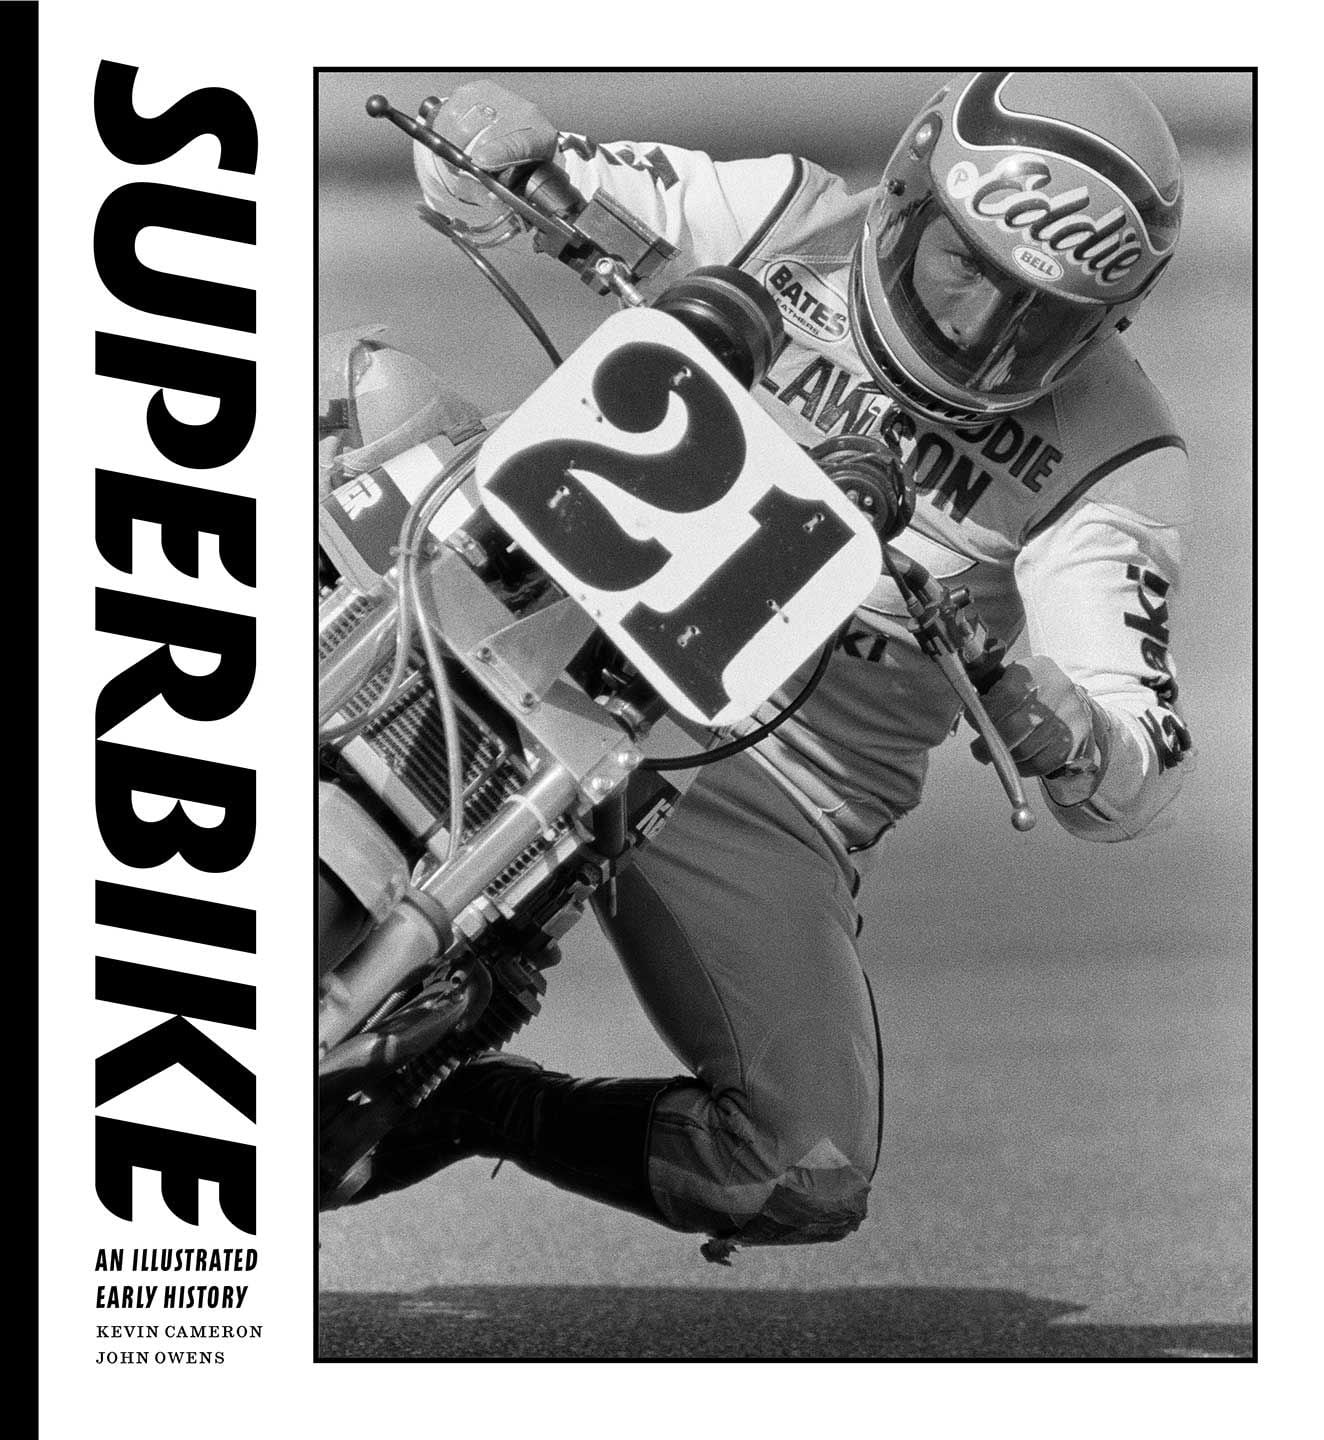 <i>Superbike: An Illustrated Early History</i> by Kevin Cameron and John Owens is a spectacular new book on the “toddler” years of superbike racing, 1976–1986.